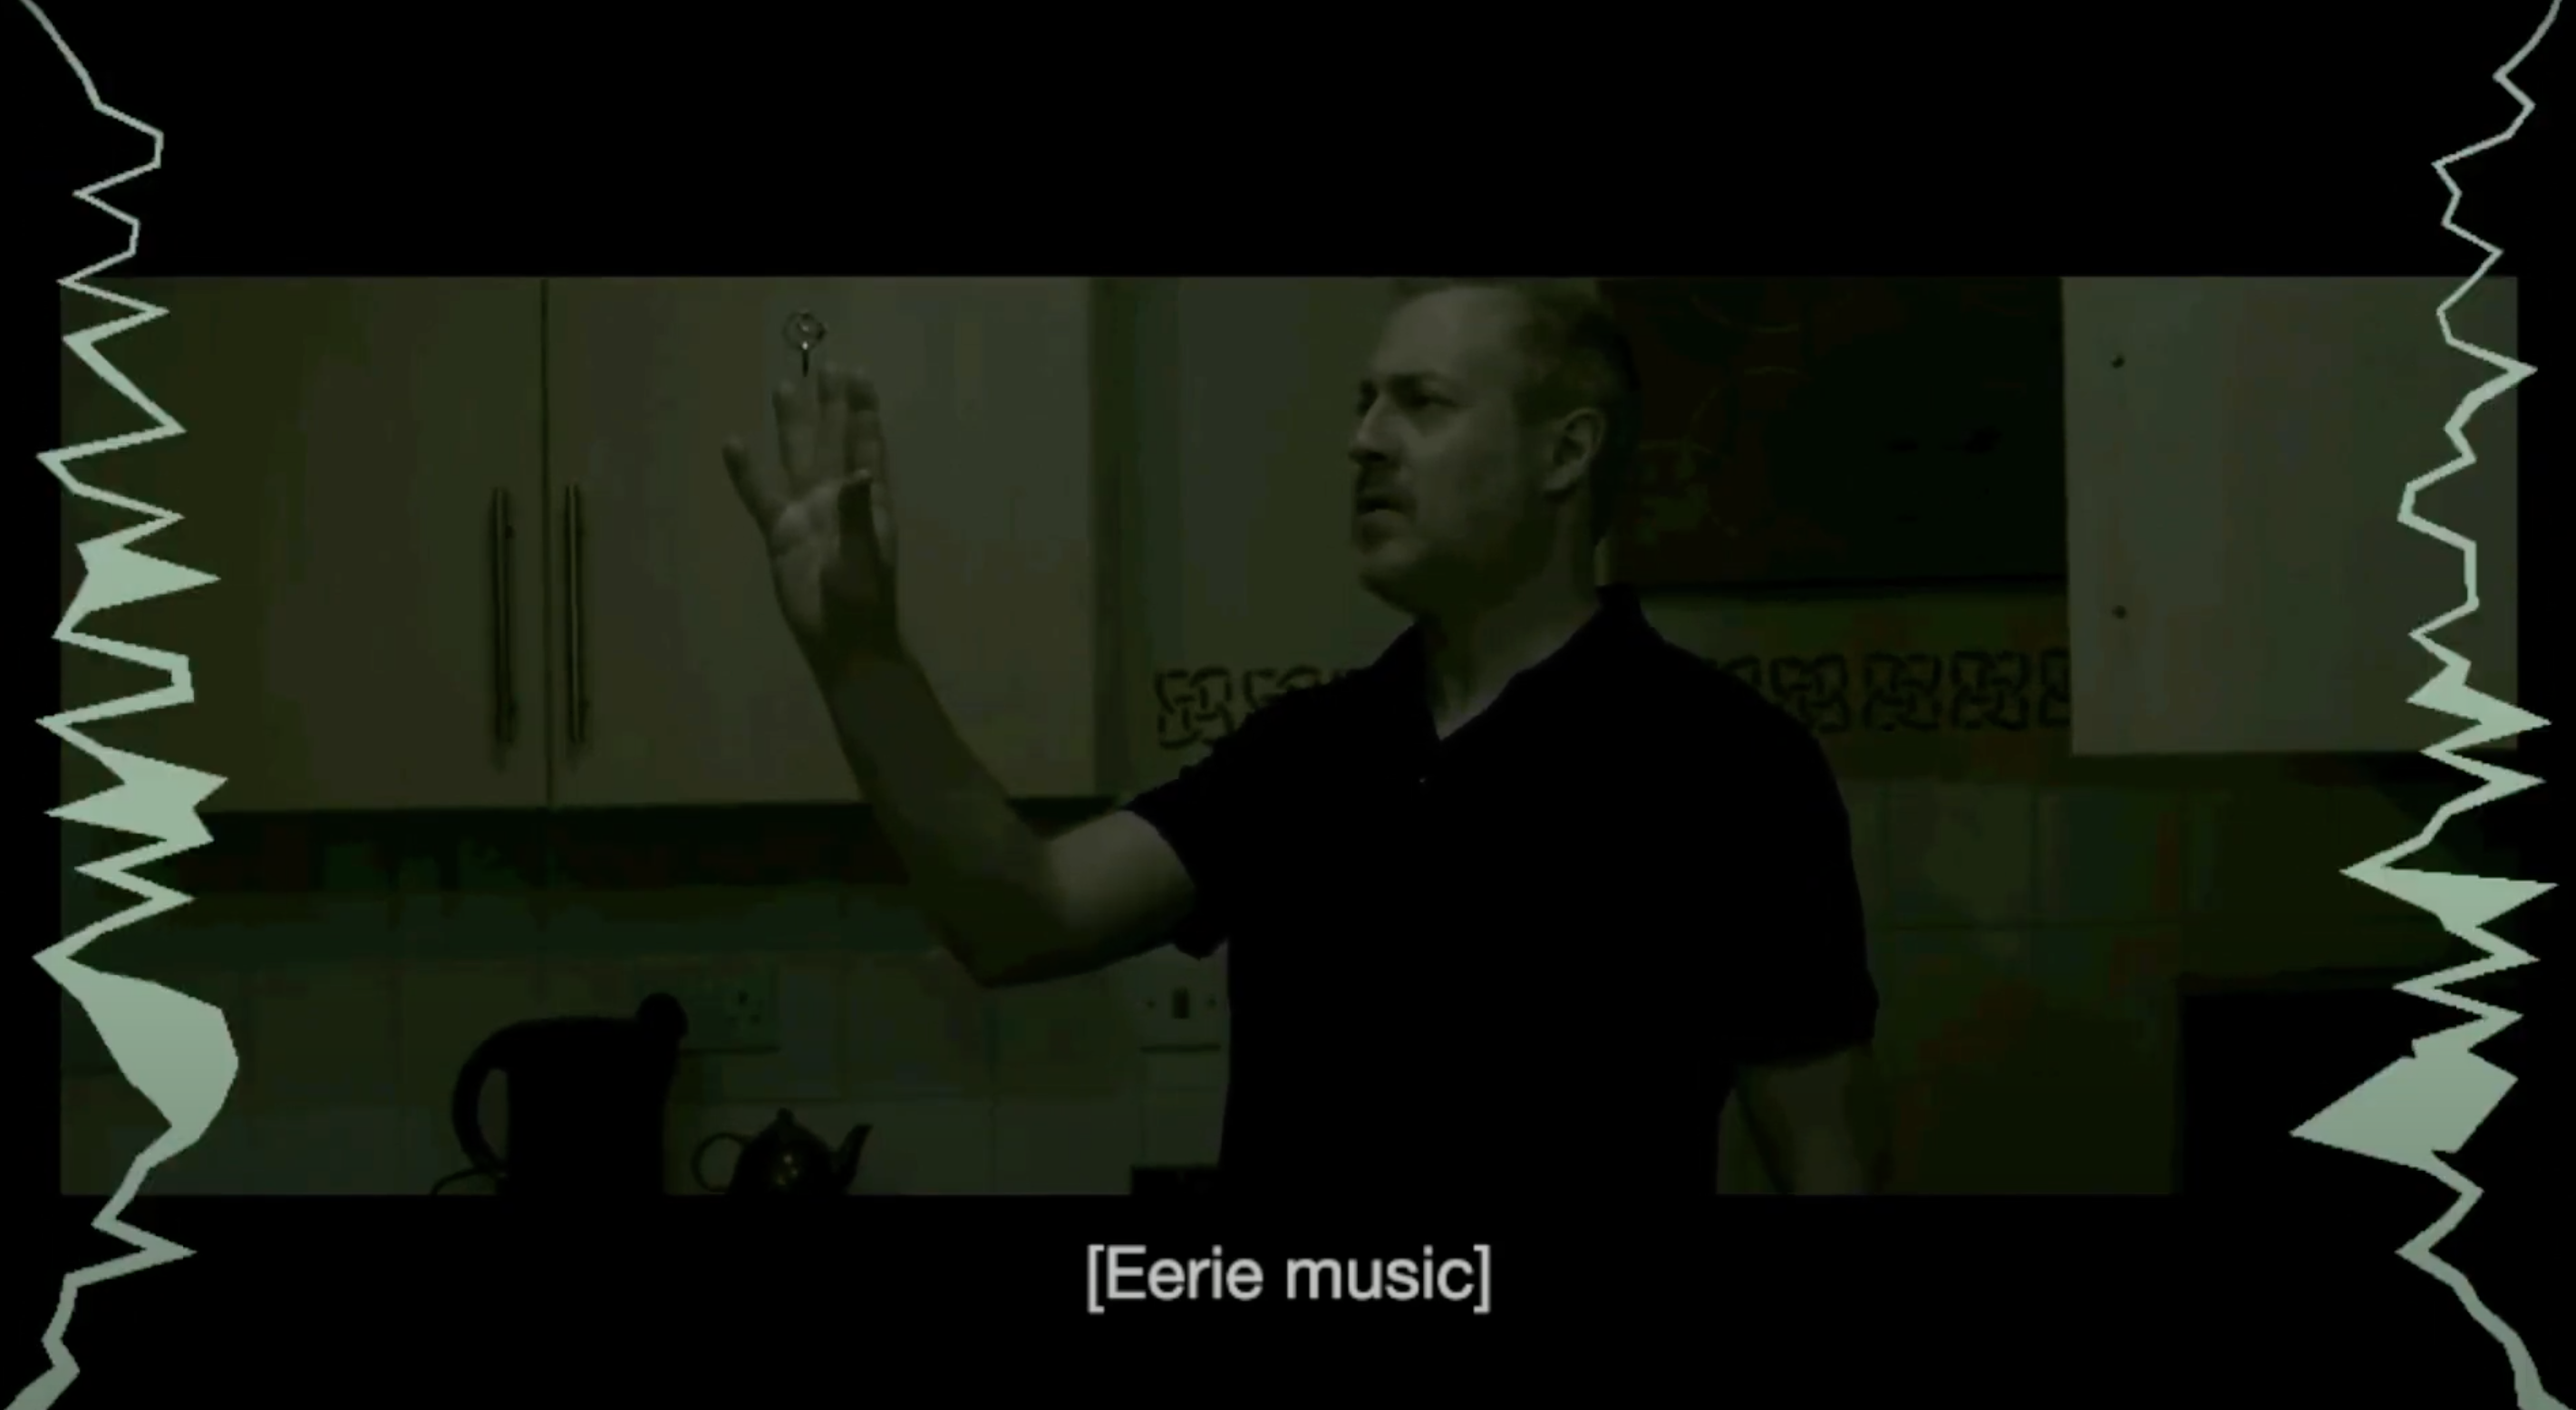 A dim-lit scene from a horror movie in which an man reaches for a mysterious key. Closed captioning reads: Eerie music with jagged green lines on the left and right.